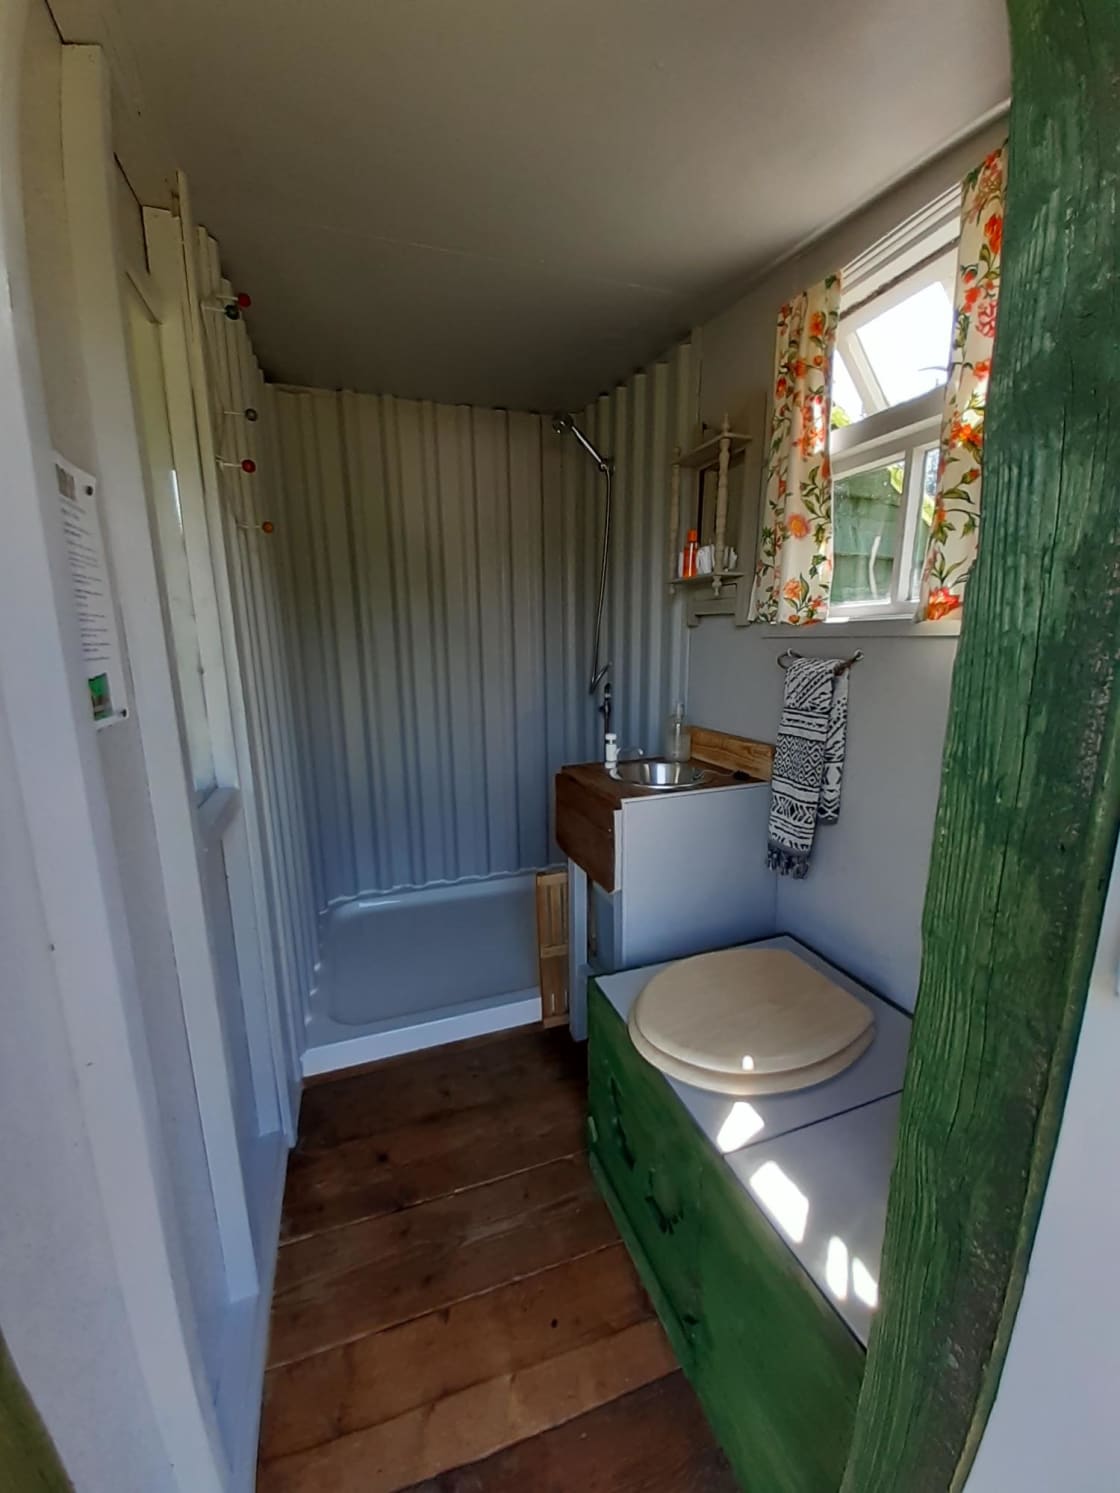 Your own private, spacious gas powered shower and waterless eco-toilet